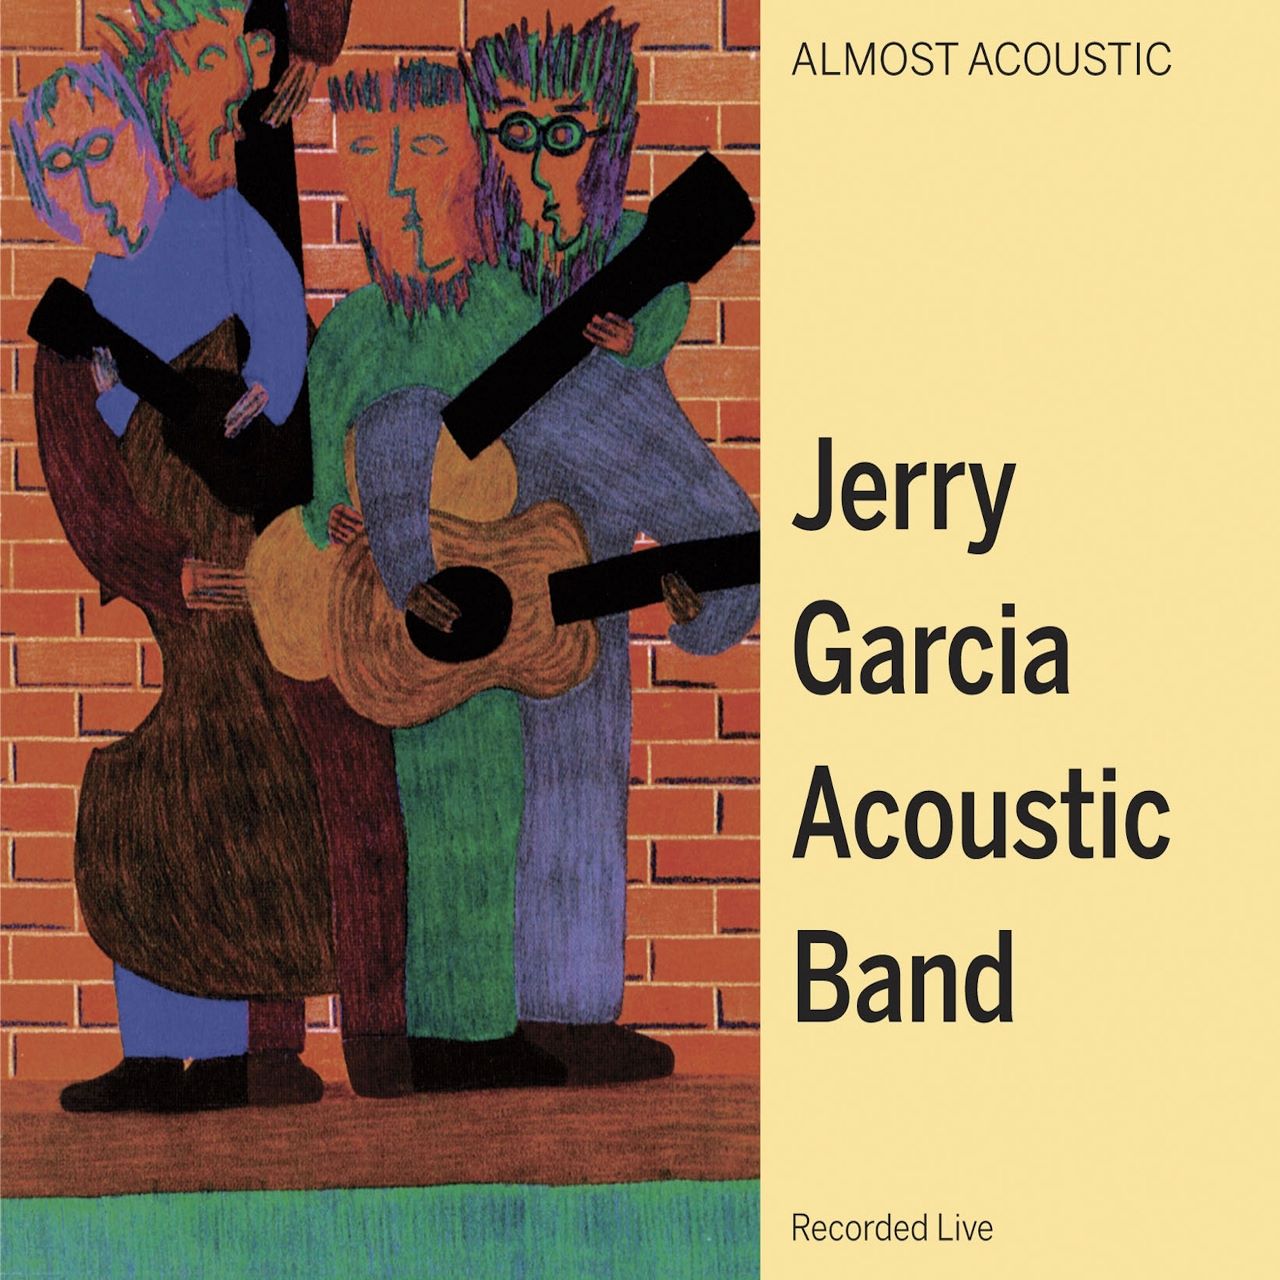 Jerry Garcia Acoustic Band - Almost Acoustic cover album